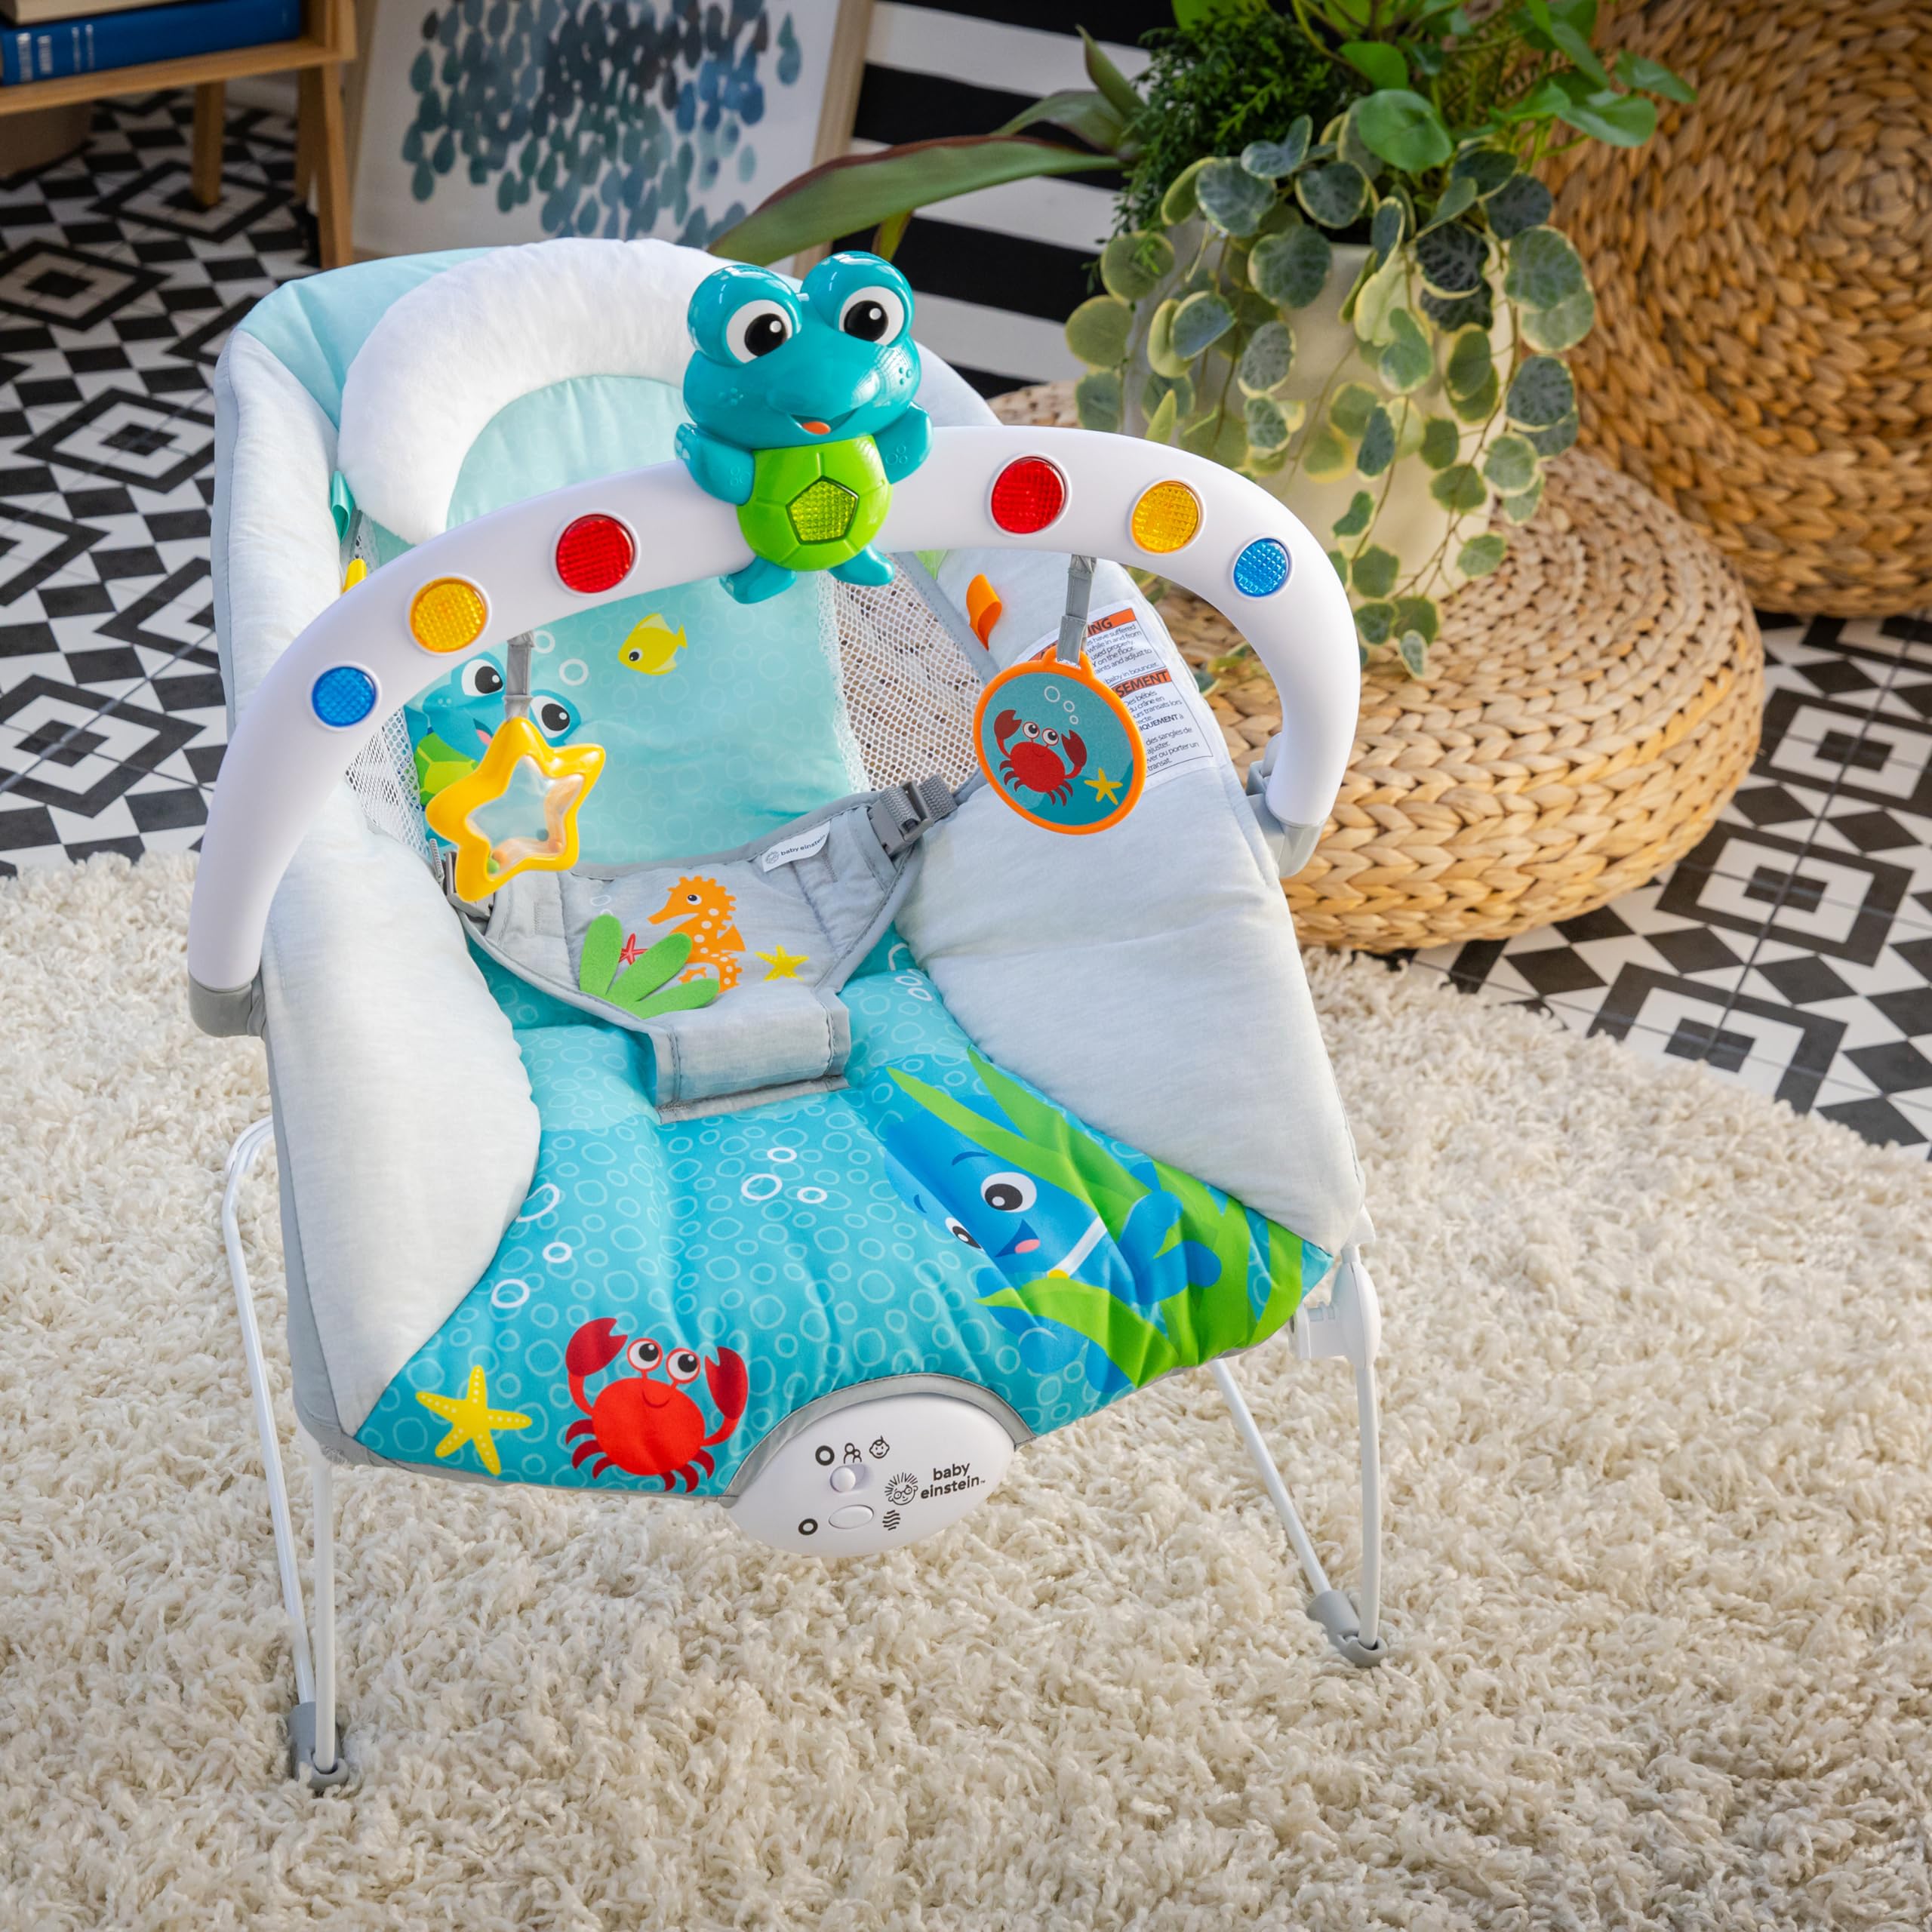 Baby Einstein Ocean Explorers Musical Bouncer Infant Seat, Kick to It Neptune, Unisex, for Ages 0-6 Months up to 20 lbs